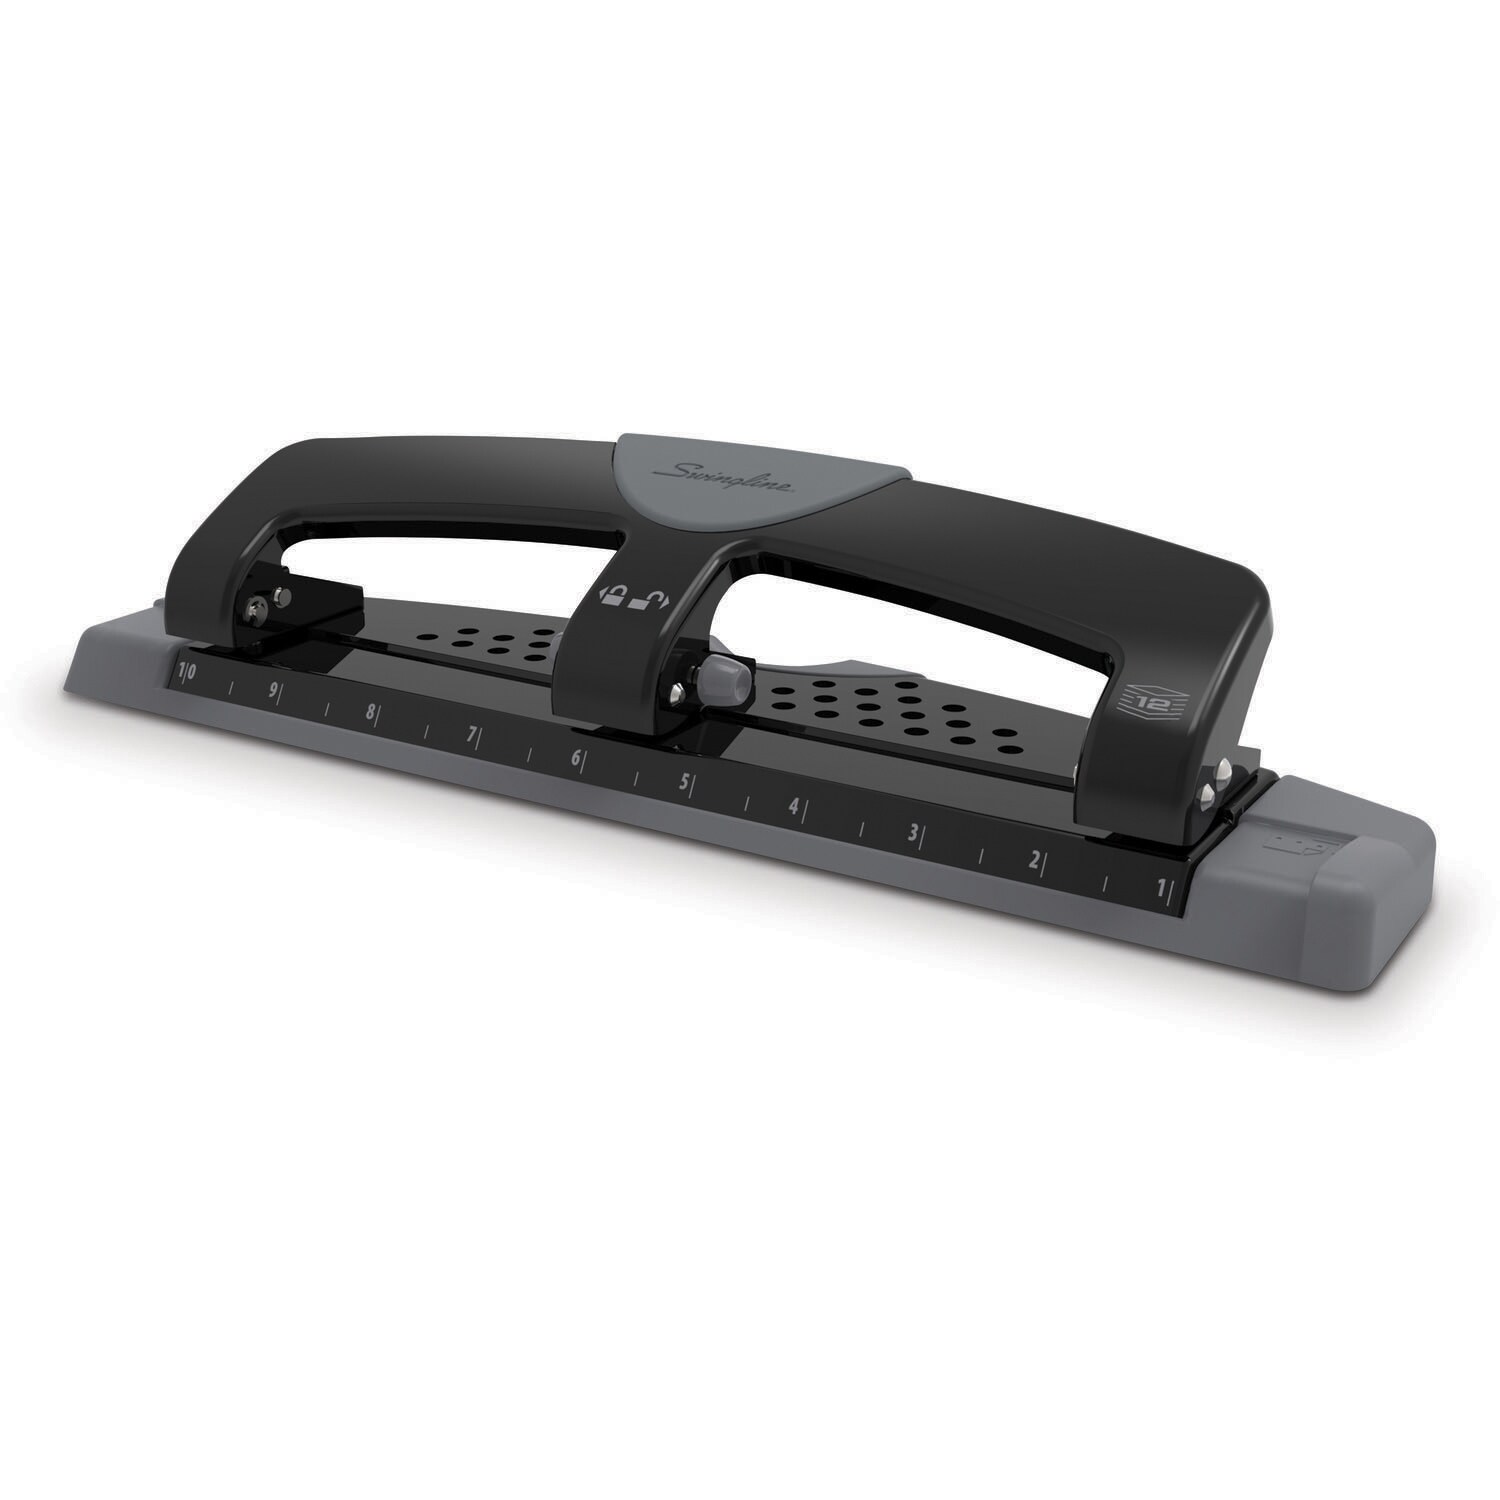 Swingline SmartTouch 3-Hole Punch at